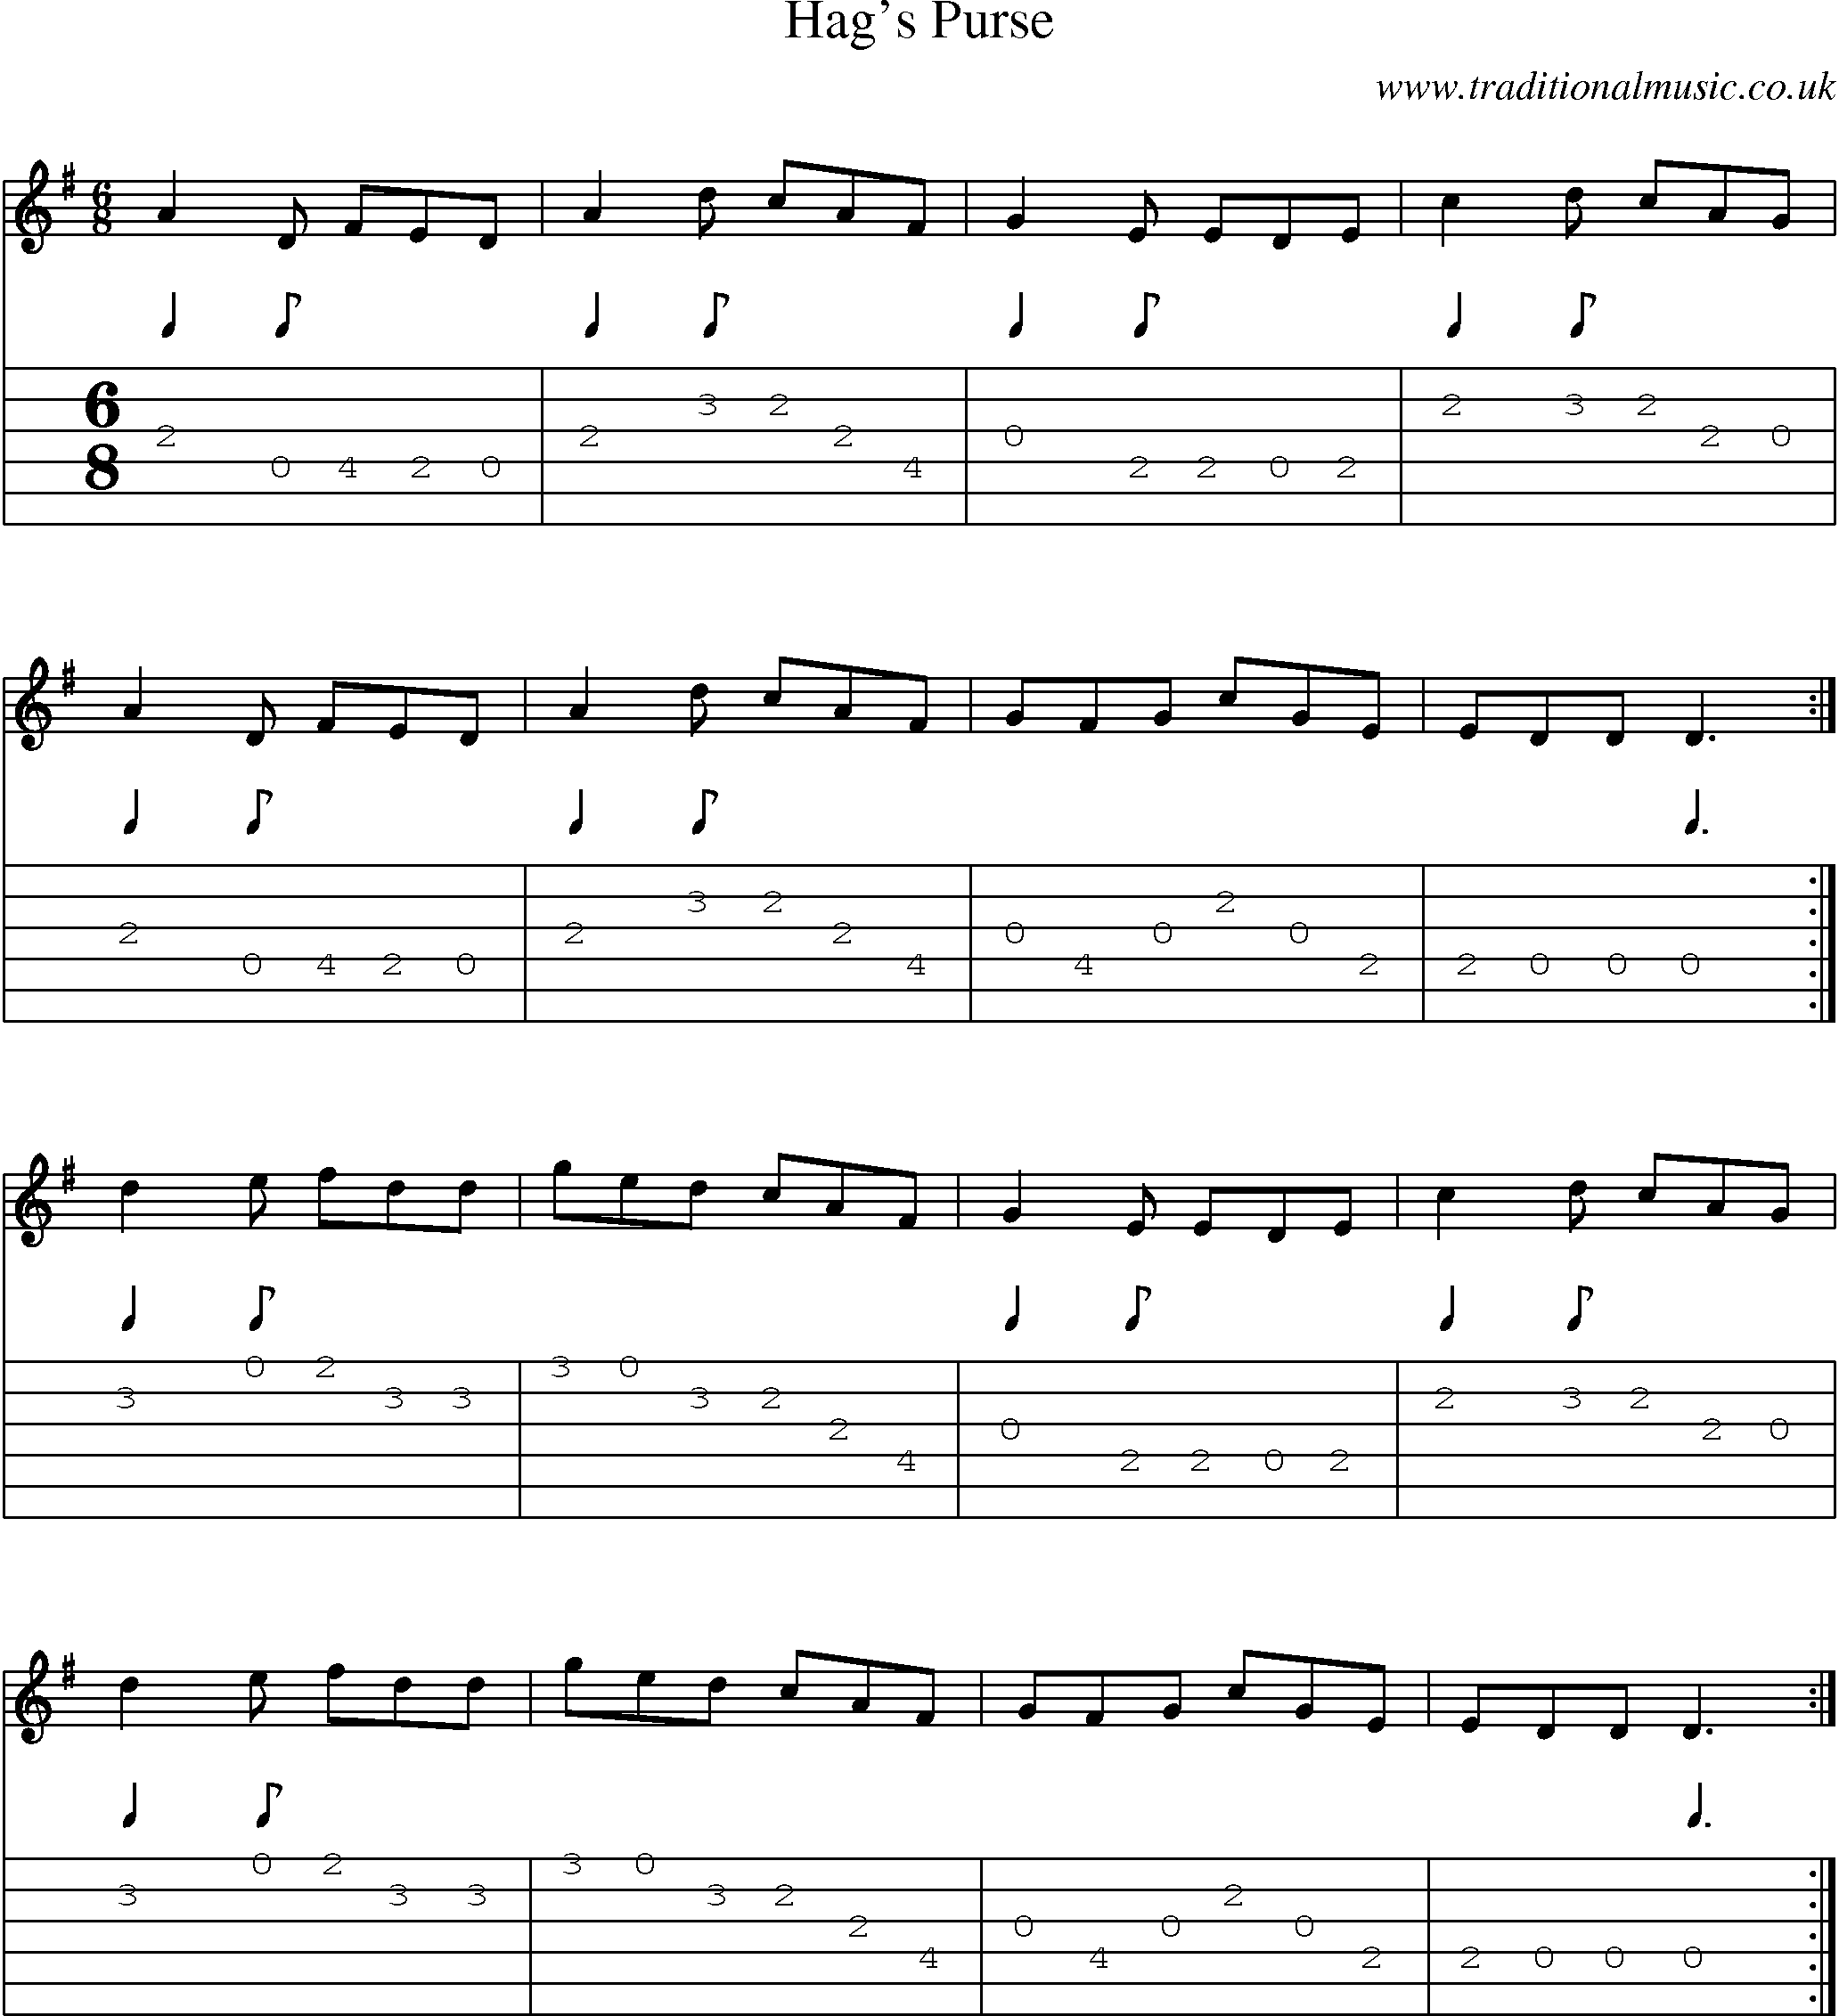 Music Score and Guitar Tabs for Hags Purse